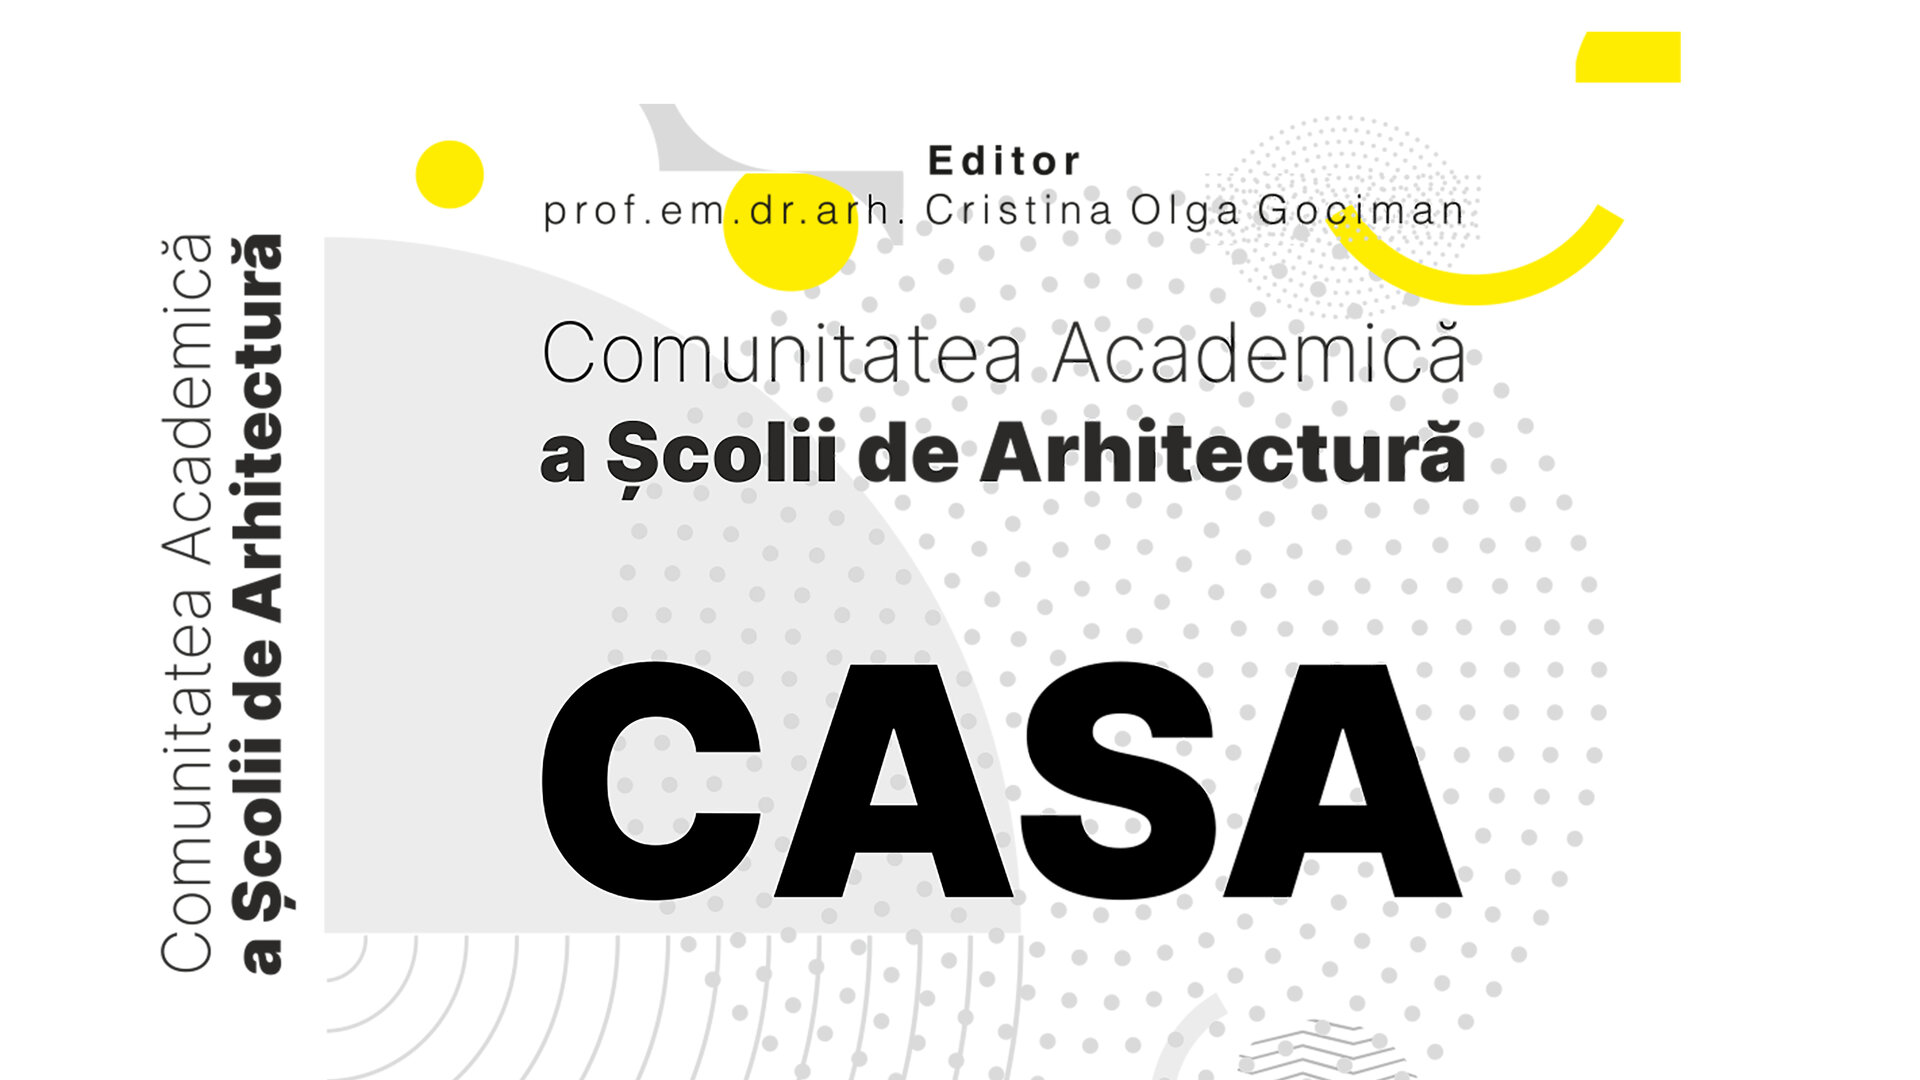 The Academic Community of the Architecture University